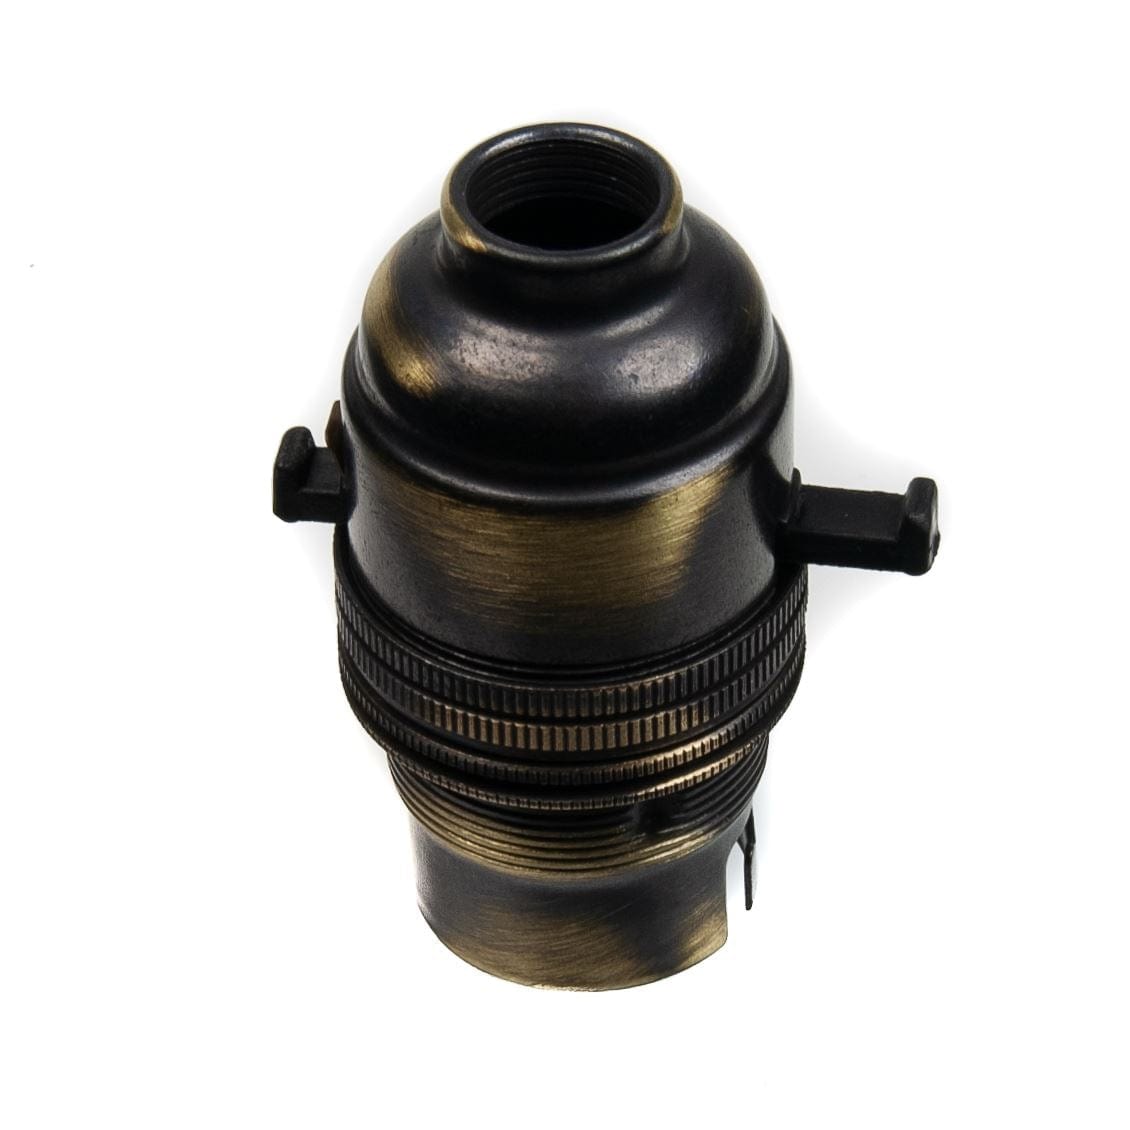 Switched Lamp Holder Antique Effect Bayonet Cap (BC) (B22d) 1/2" Screw Thread Switched Lampholders Thunderfix 100586